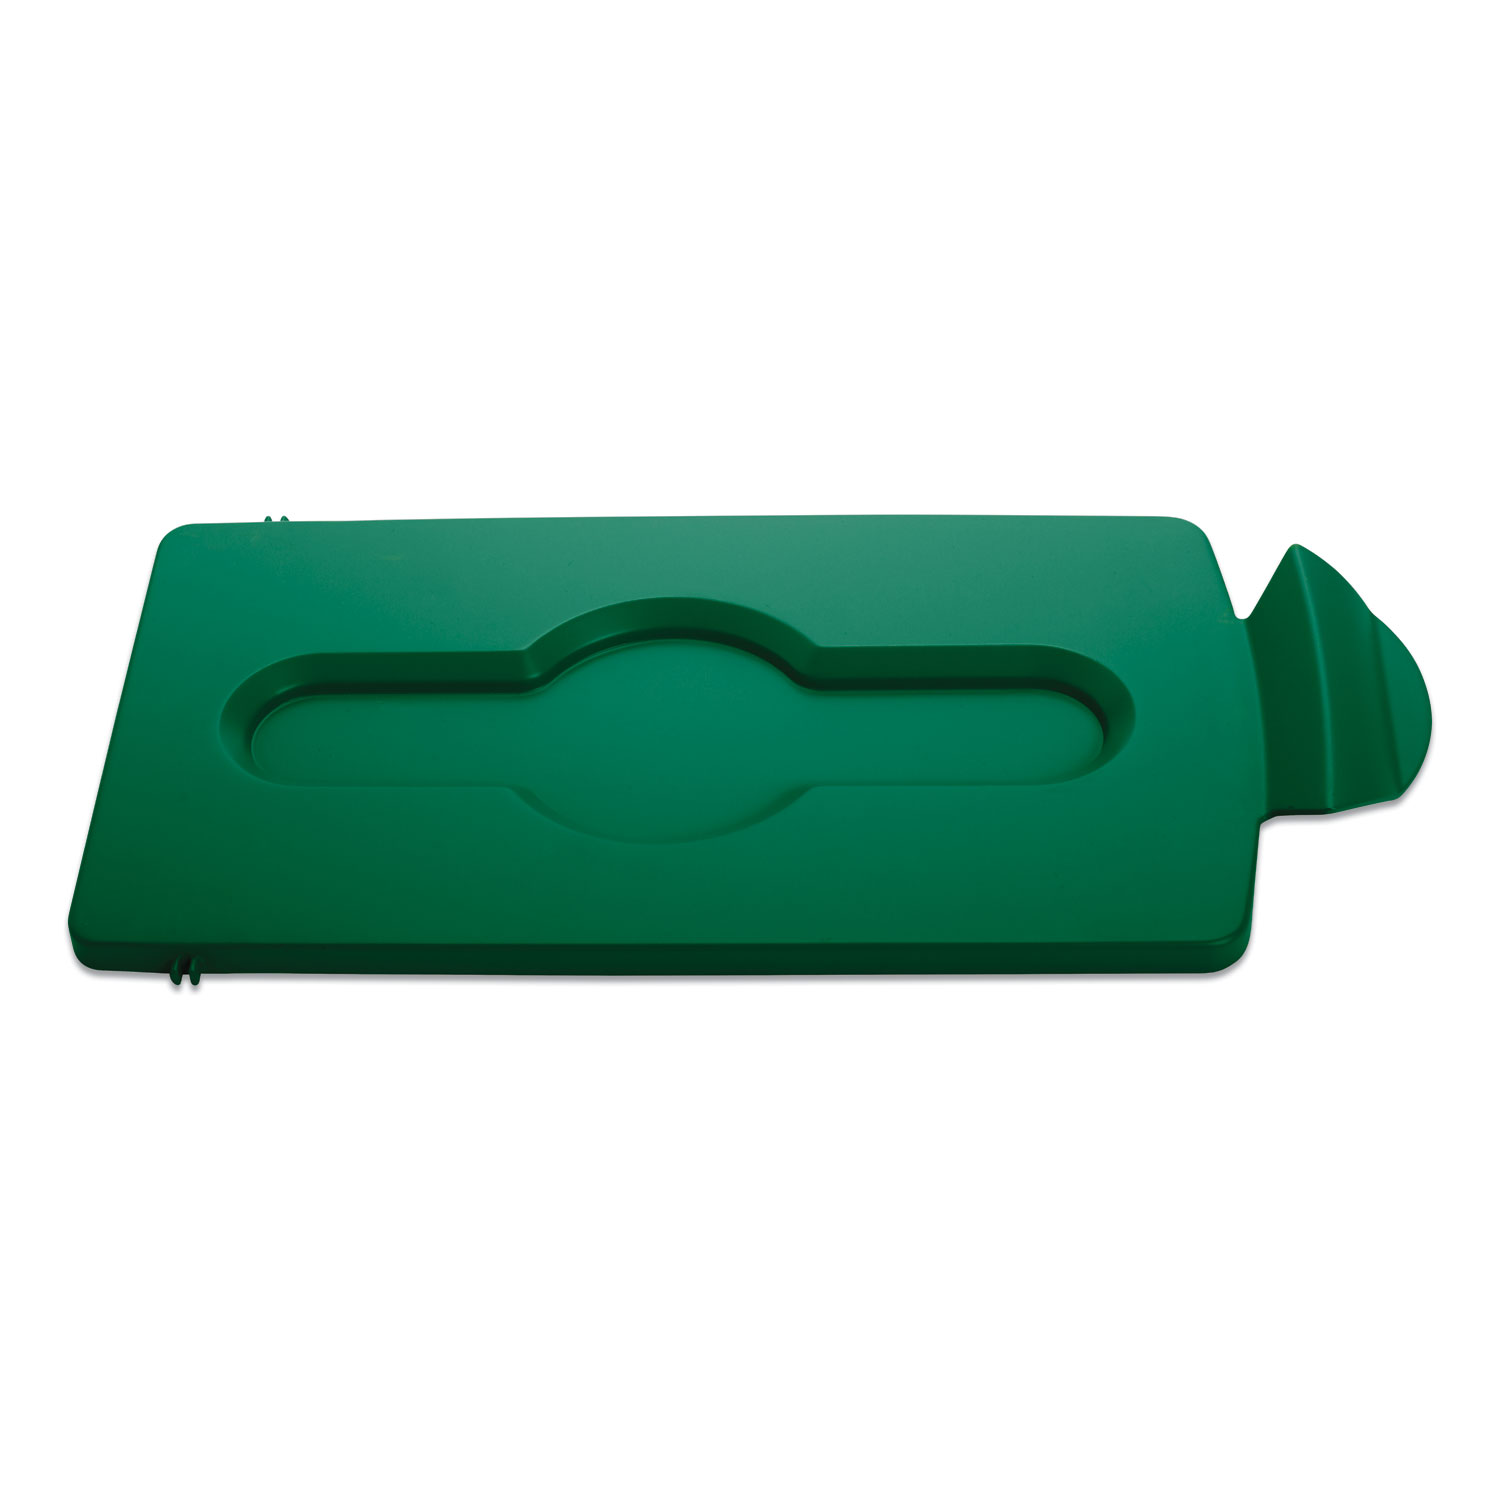  Rubbermaid Commercial 2007884 Slim Jim Single Stream Recycling Top for Slim Jim Containers, 8 x 16.5 x 0.5, Green (RCP2007884) 